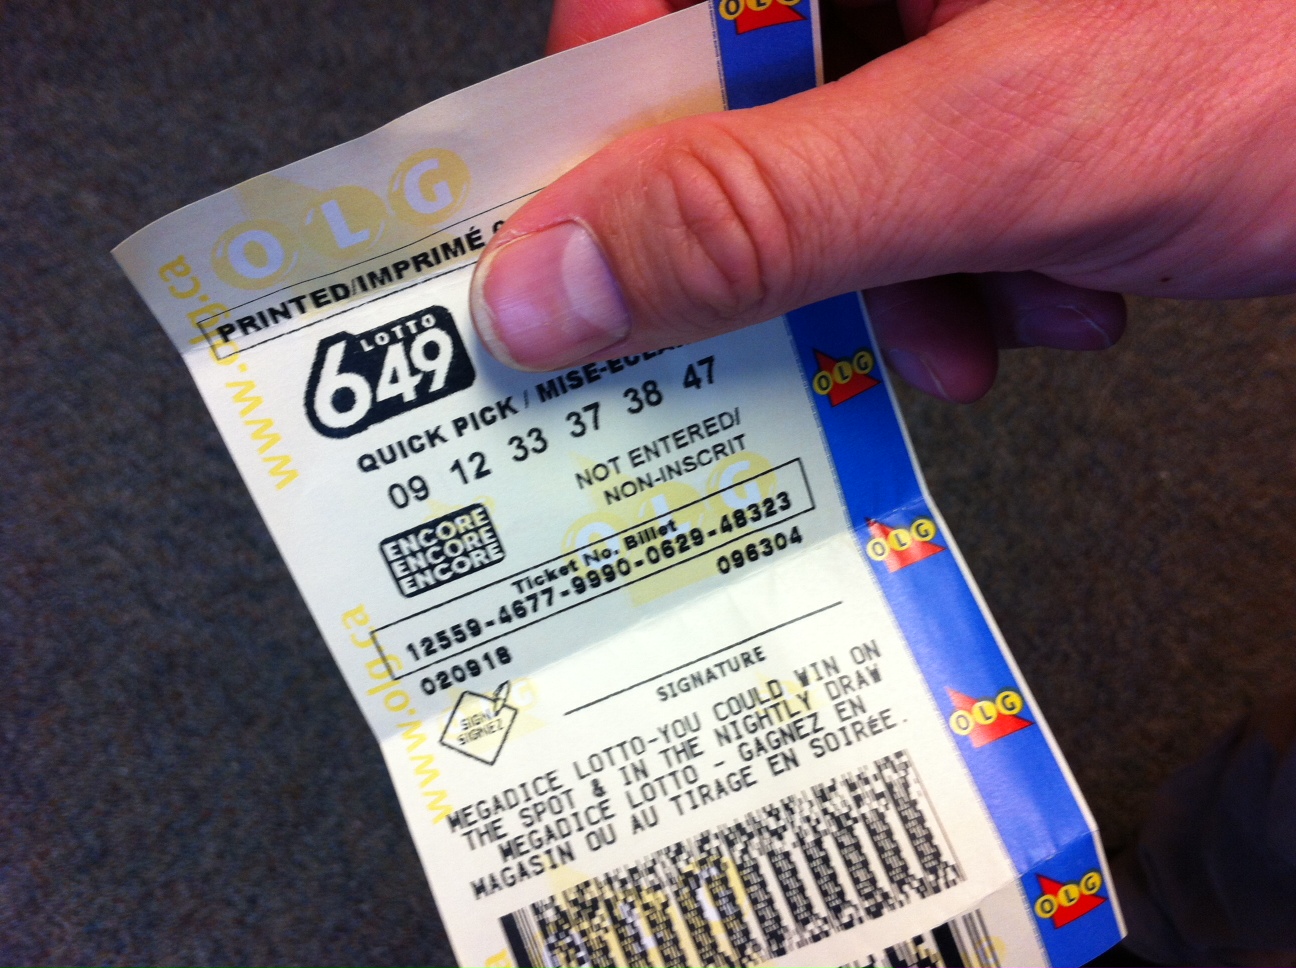 Lotto 6 49 Numbers